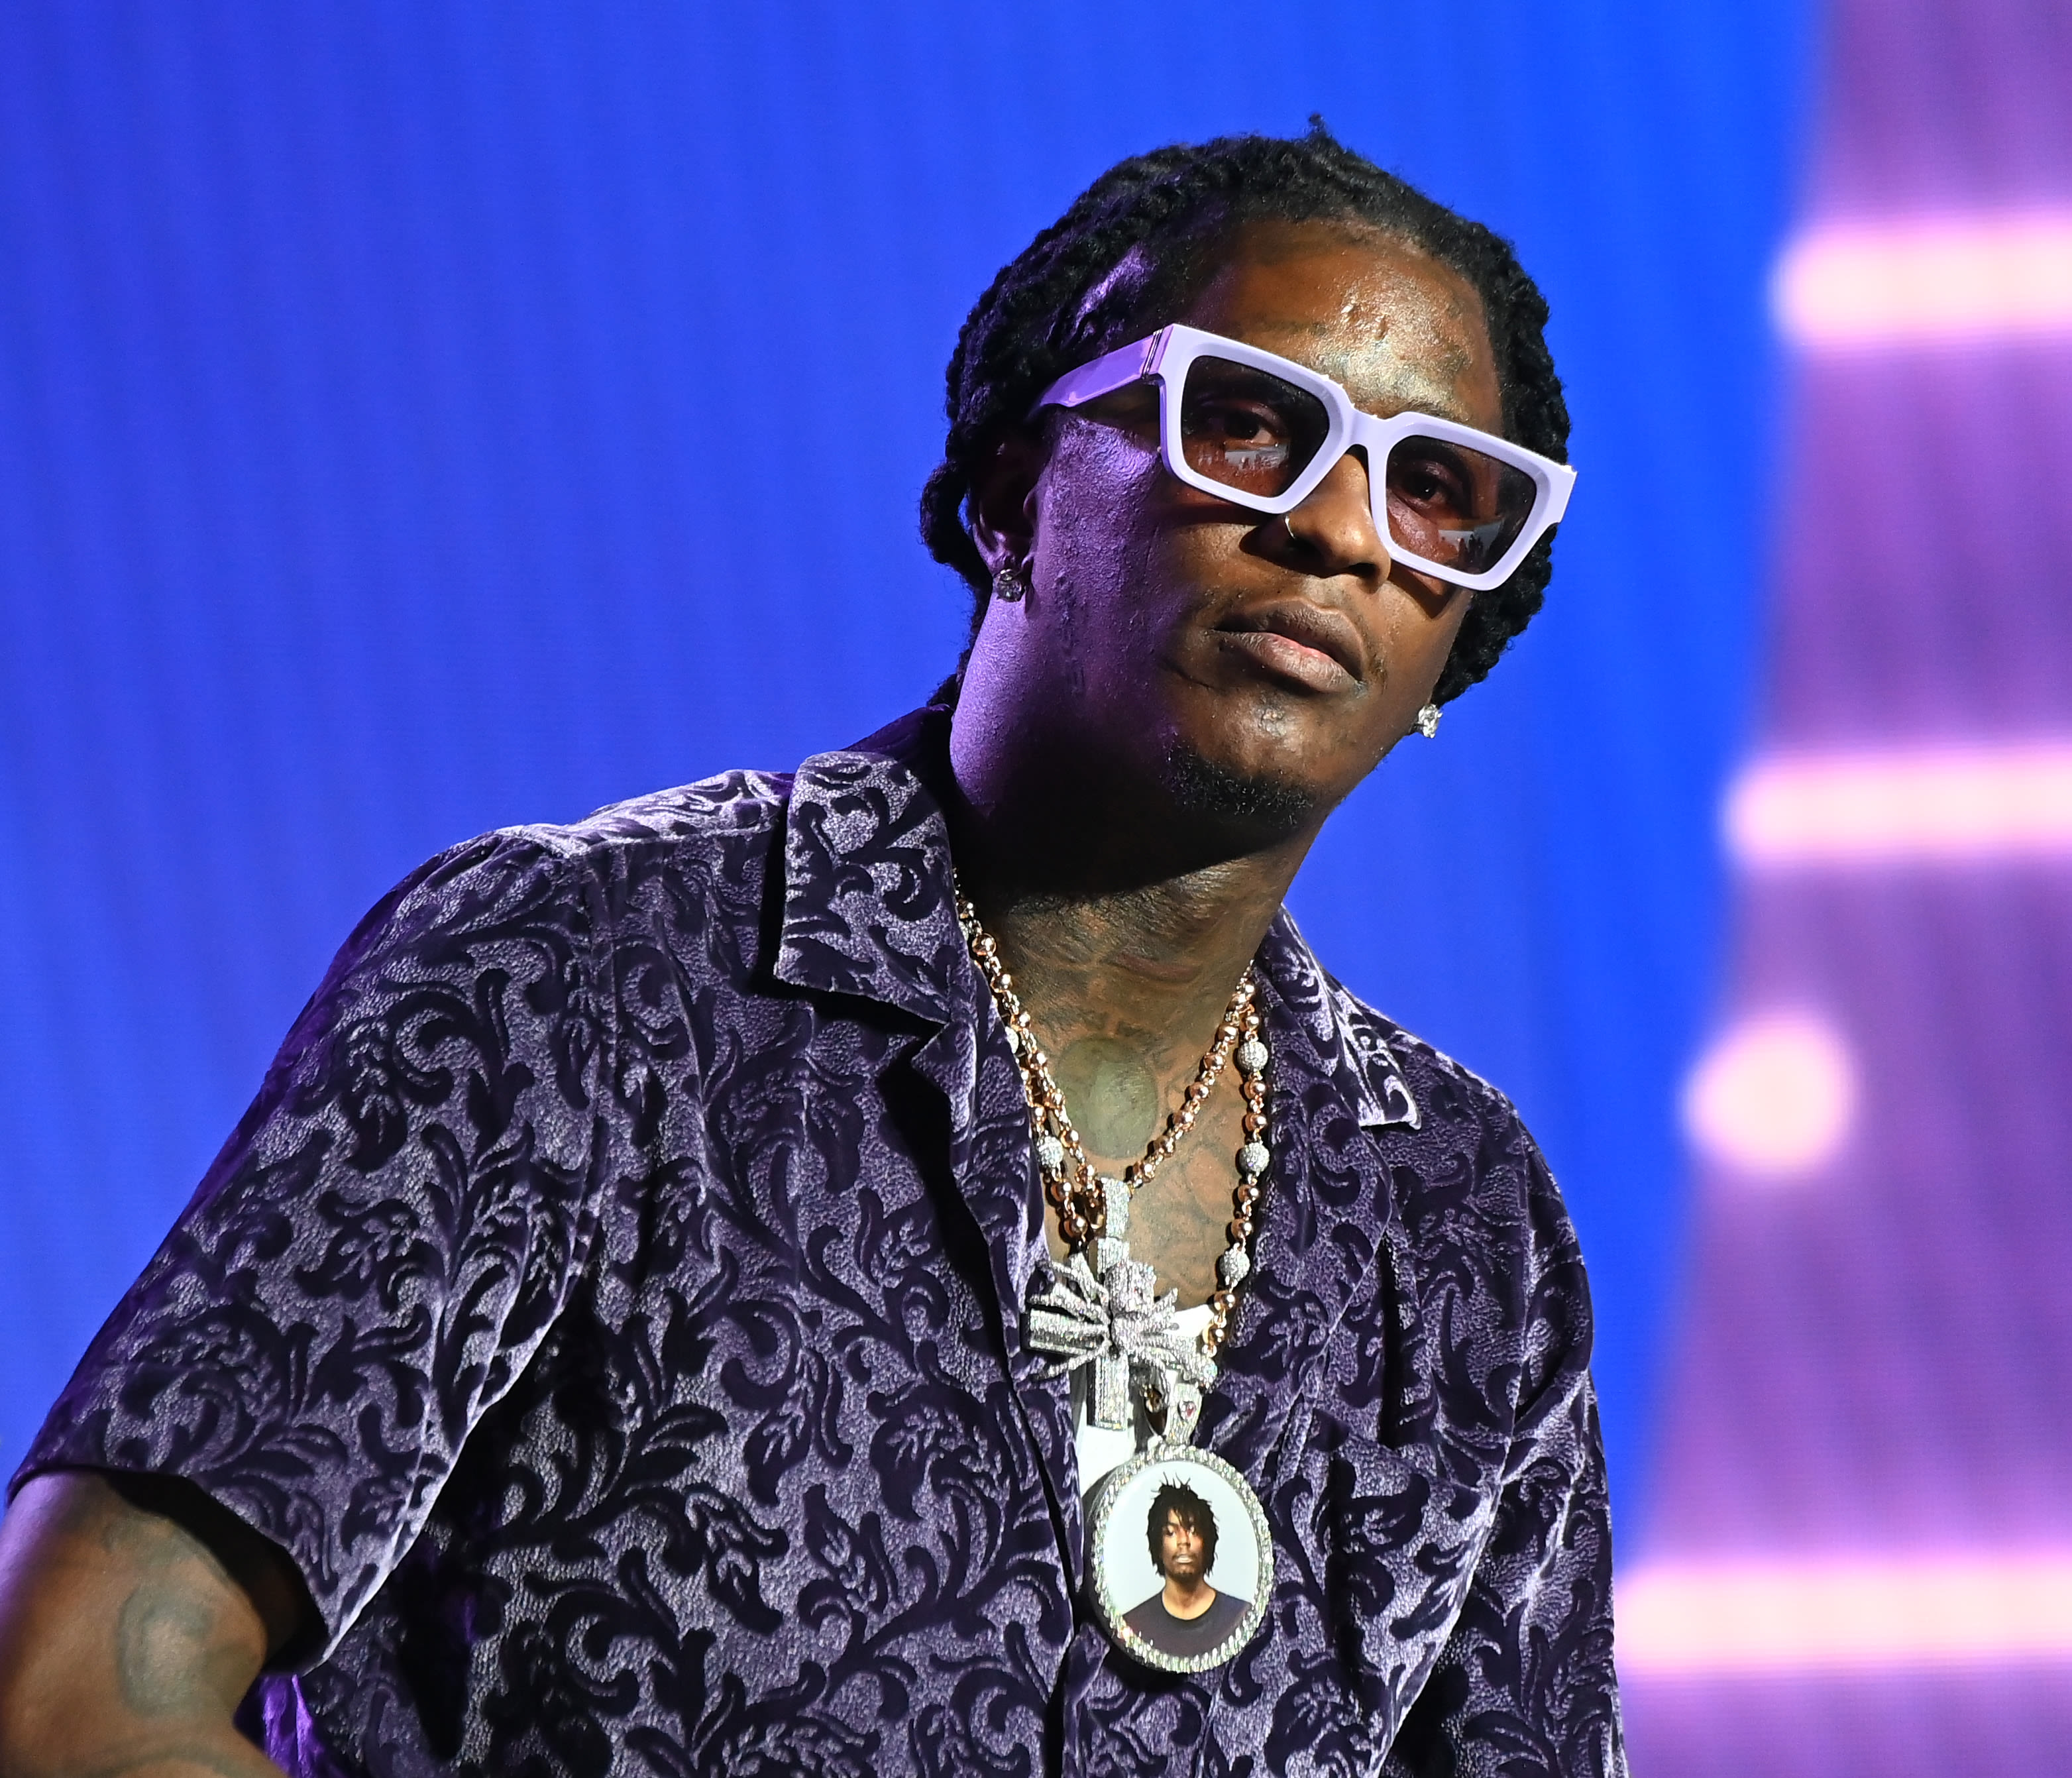 A new judge was appointed to Young Thug's RICO trial, then they recused themselves too